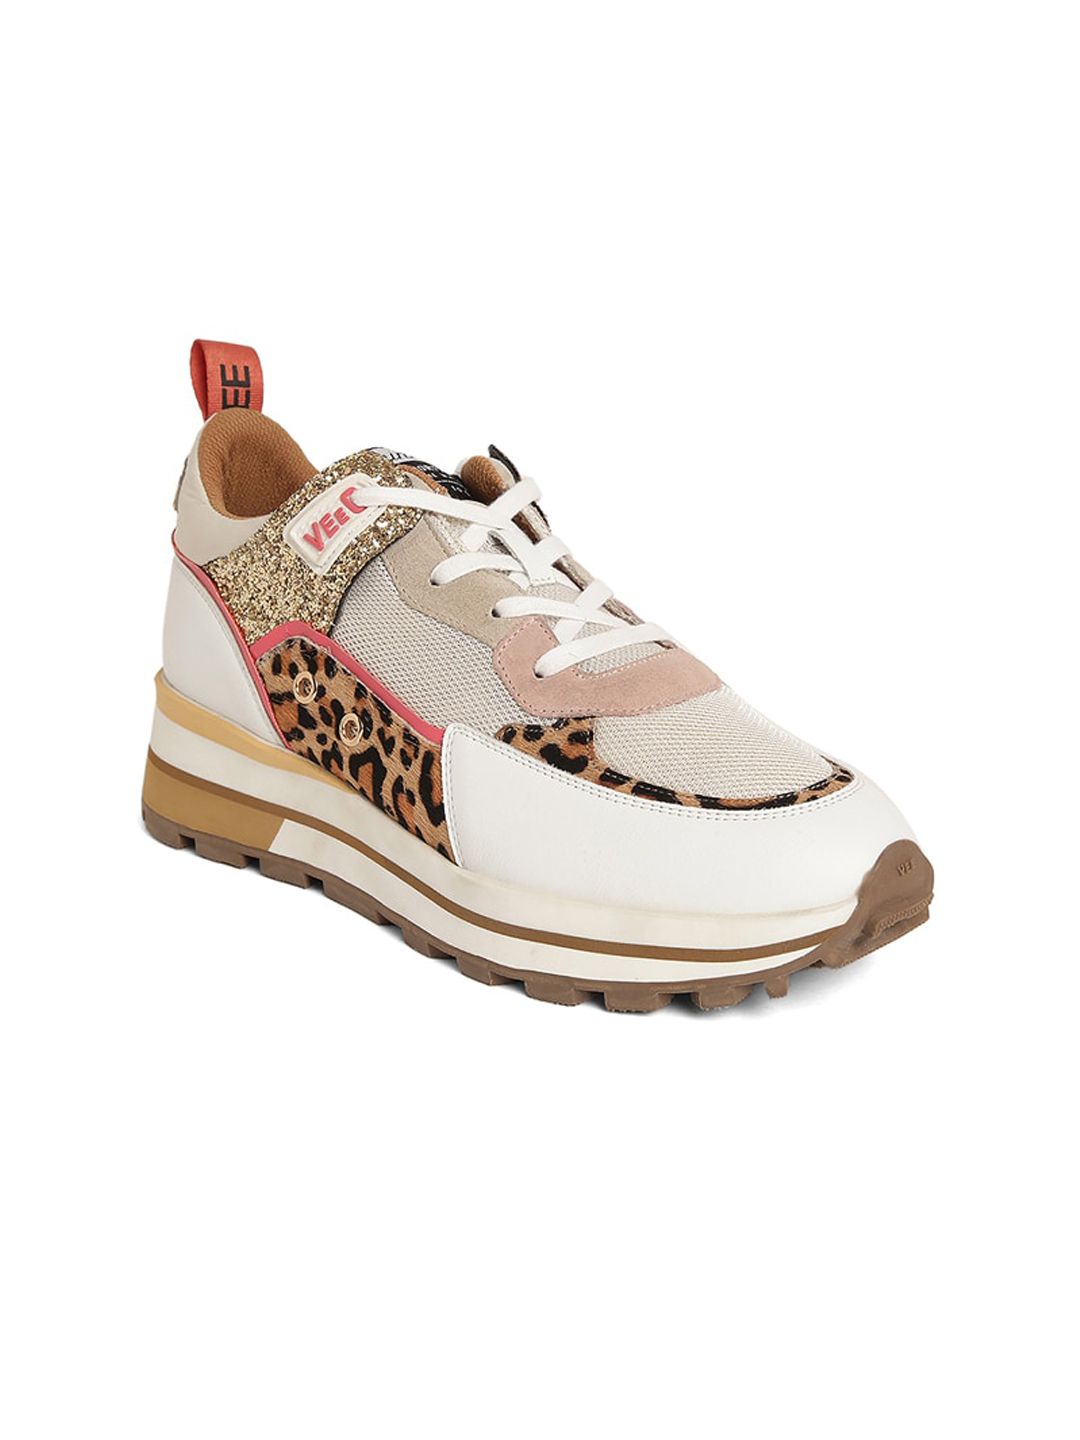 Saint G Women Off White & Beige Printed Lightweight Leather Sneakers Price in India